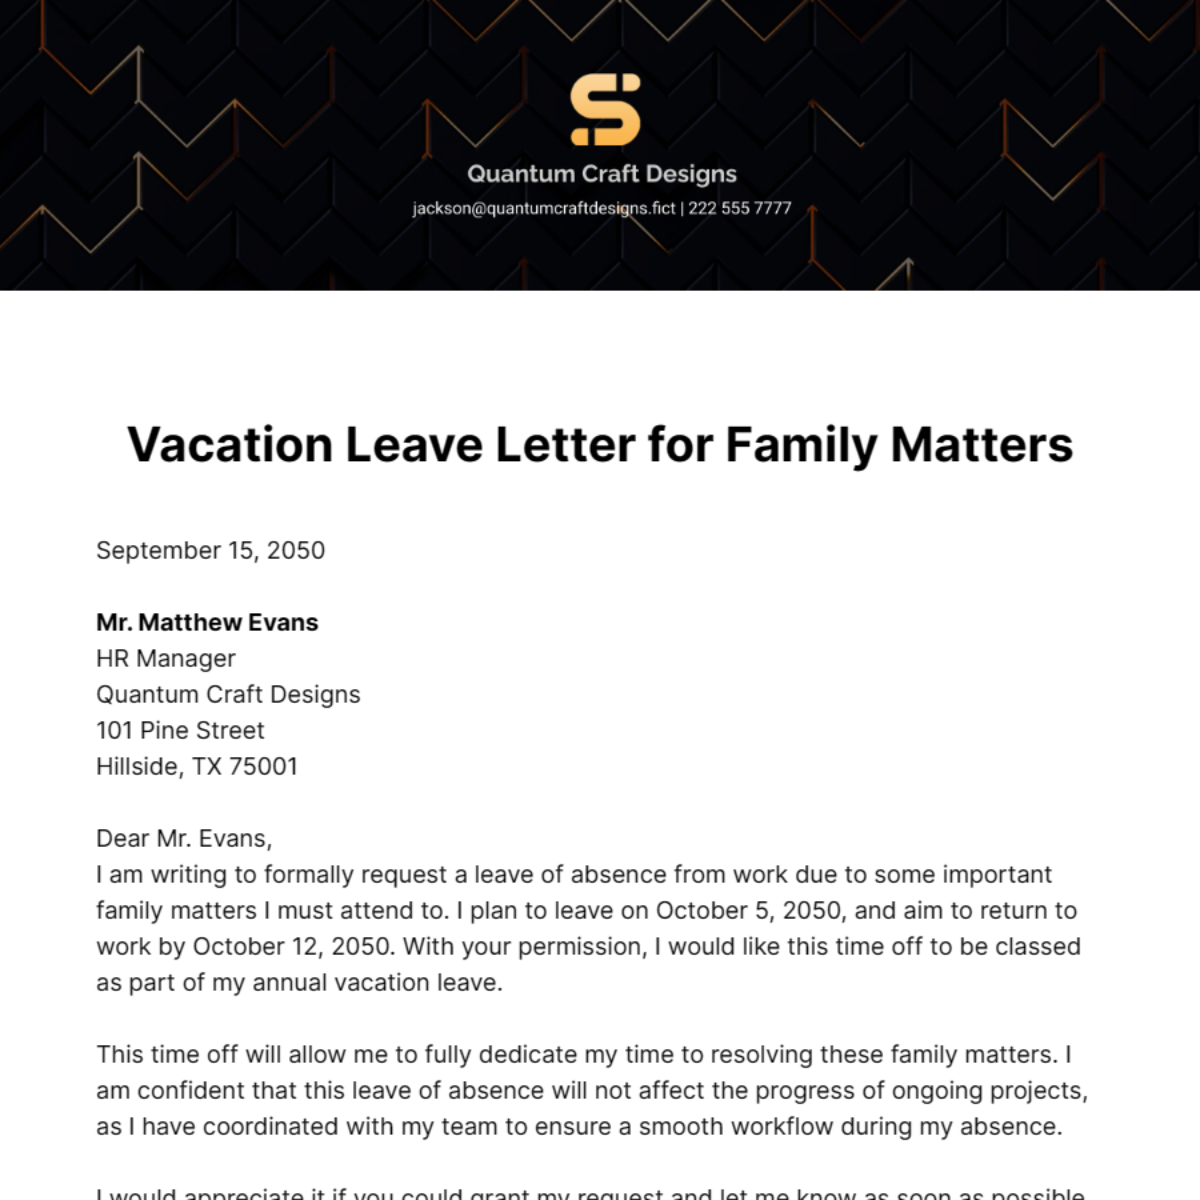 Vacation Leave Letter for Family Matters Template